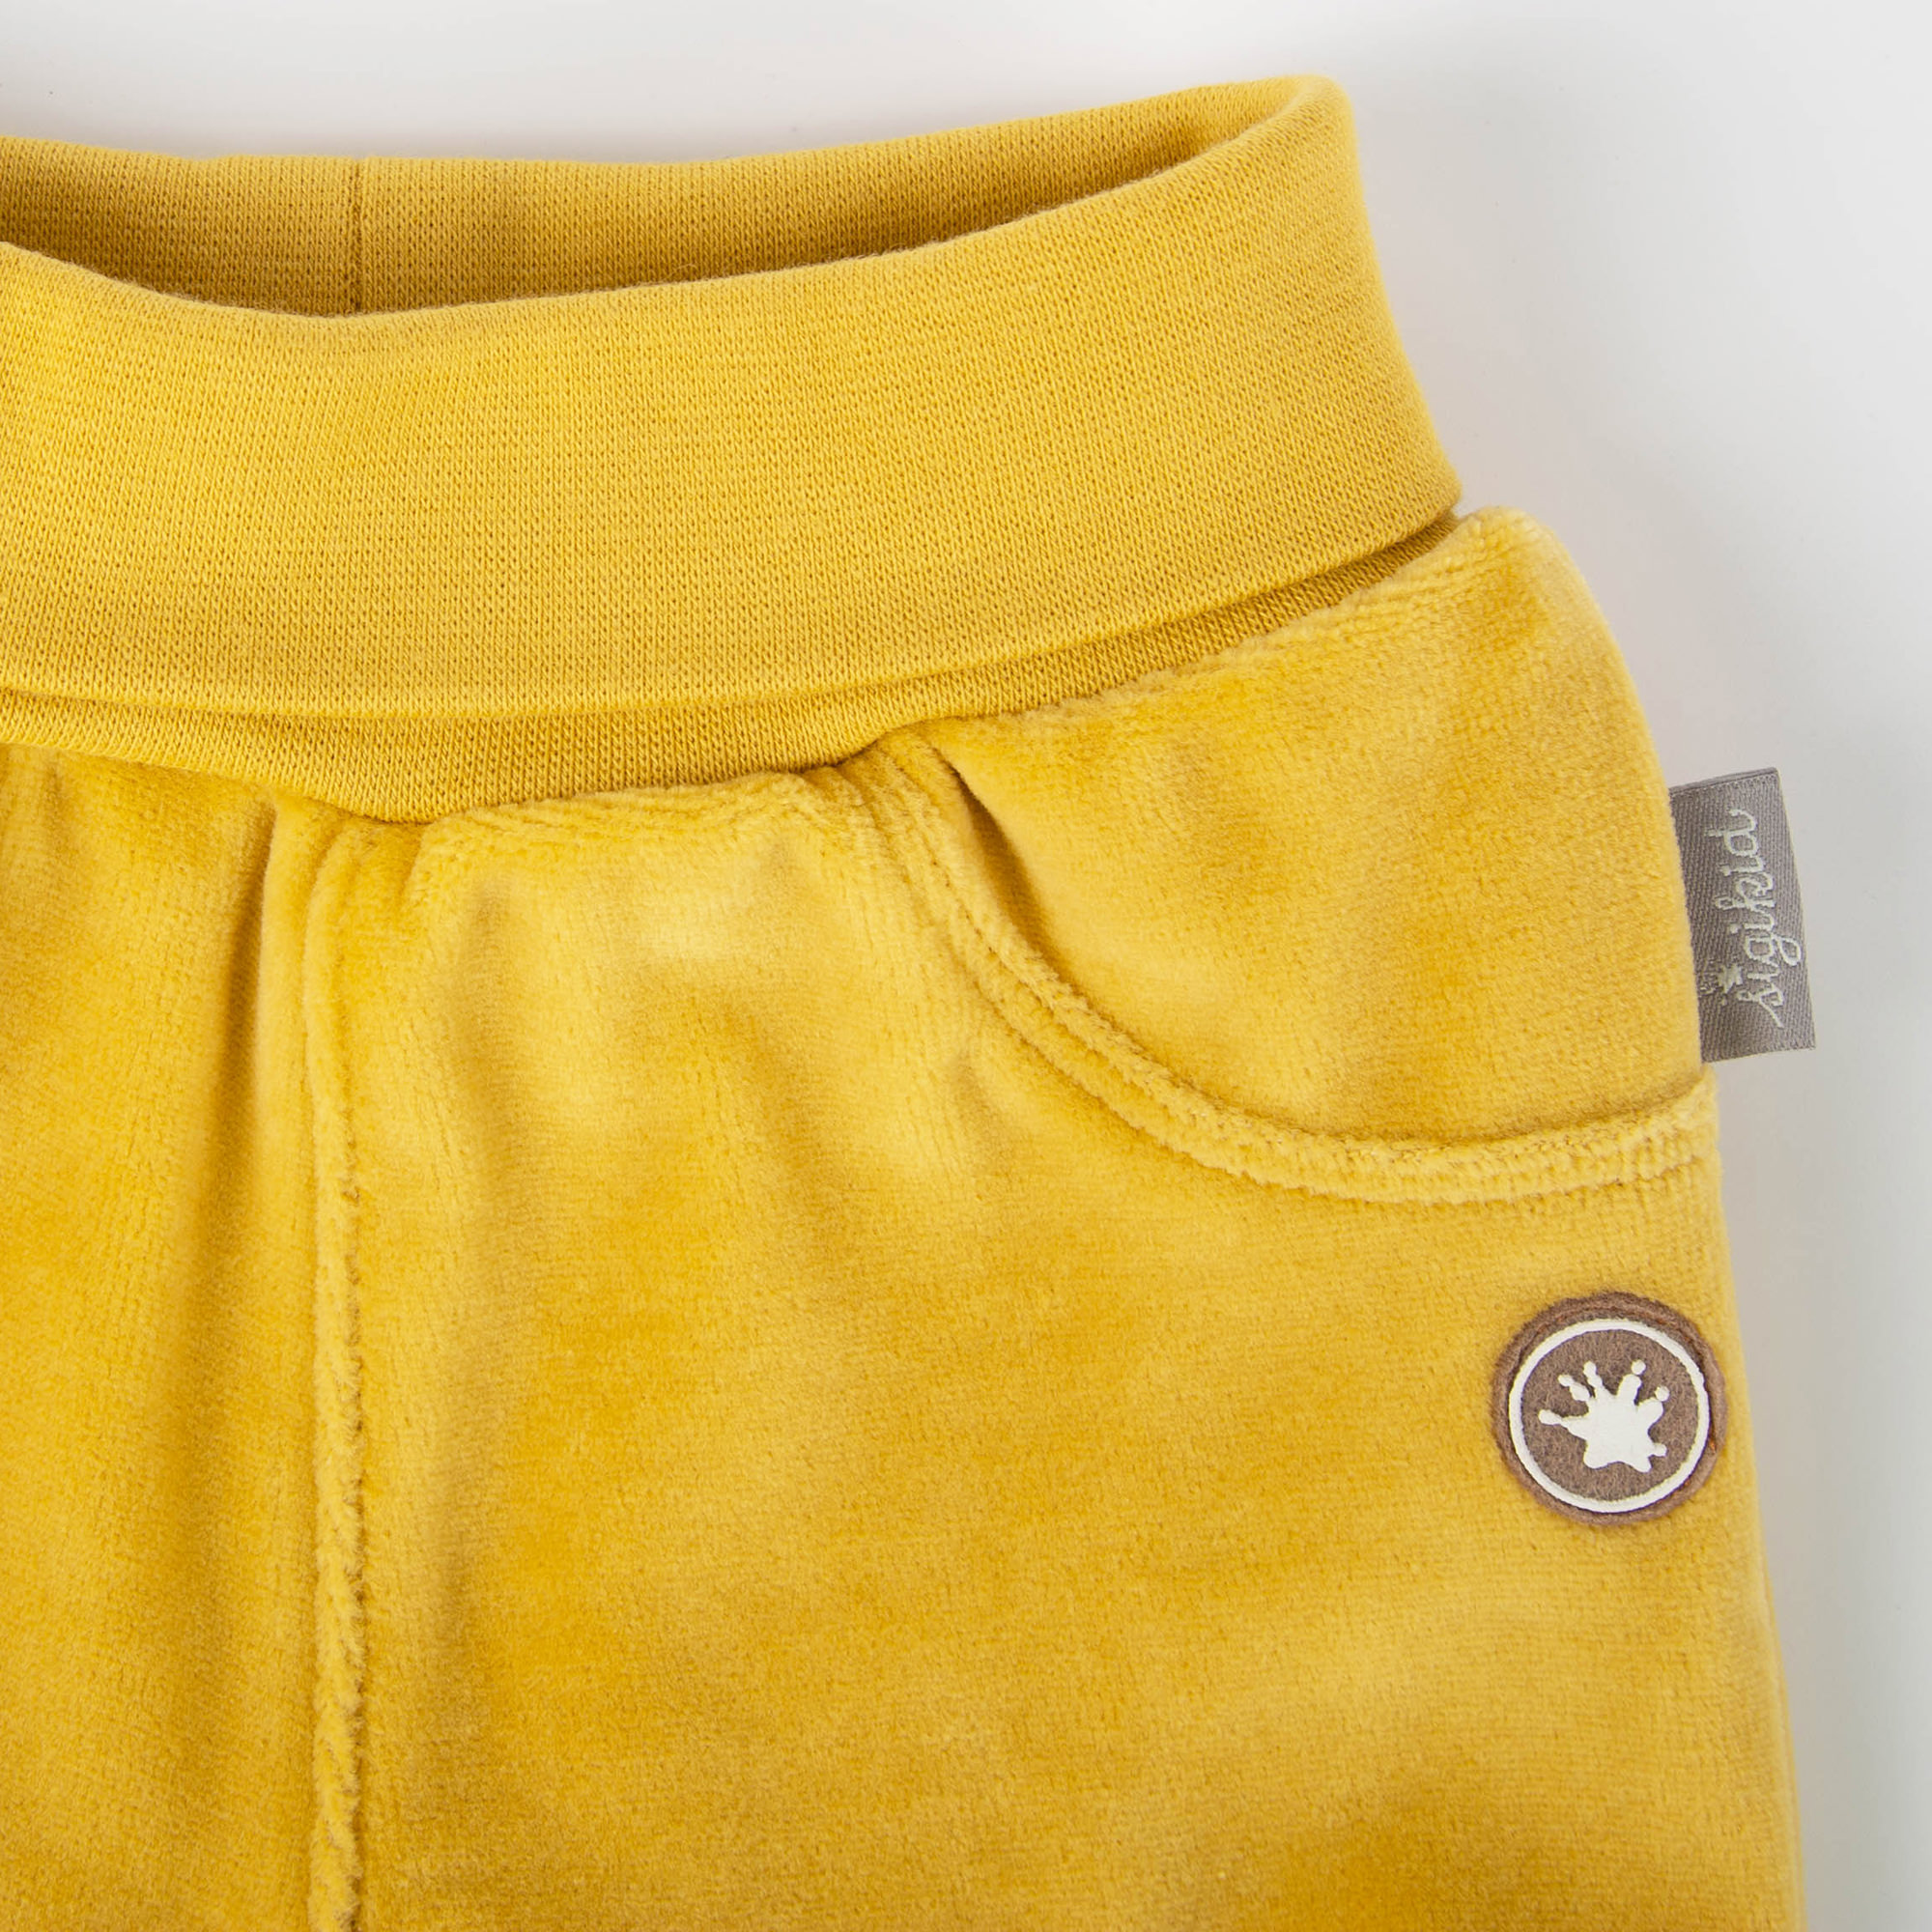 Newborn baby footed velour pants, yellow